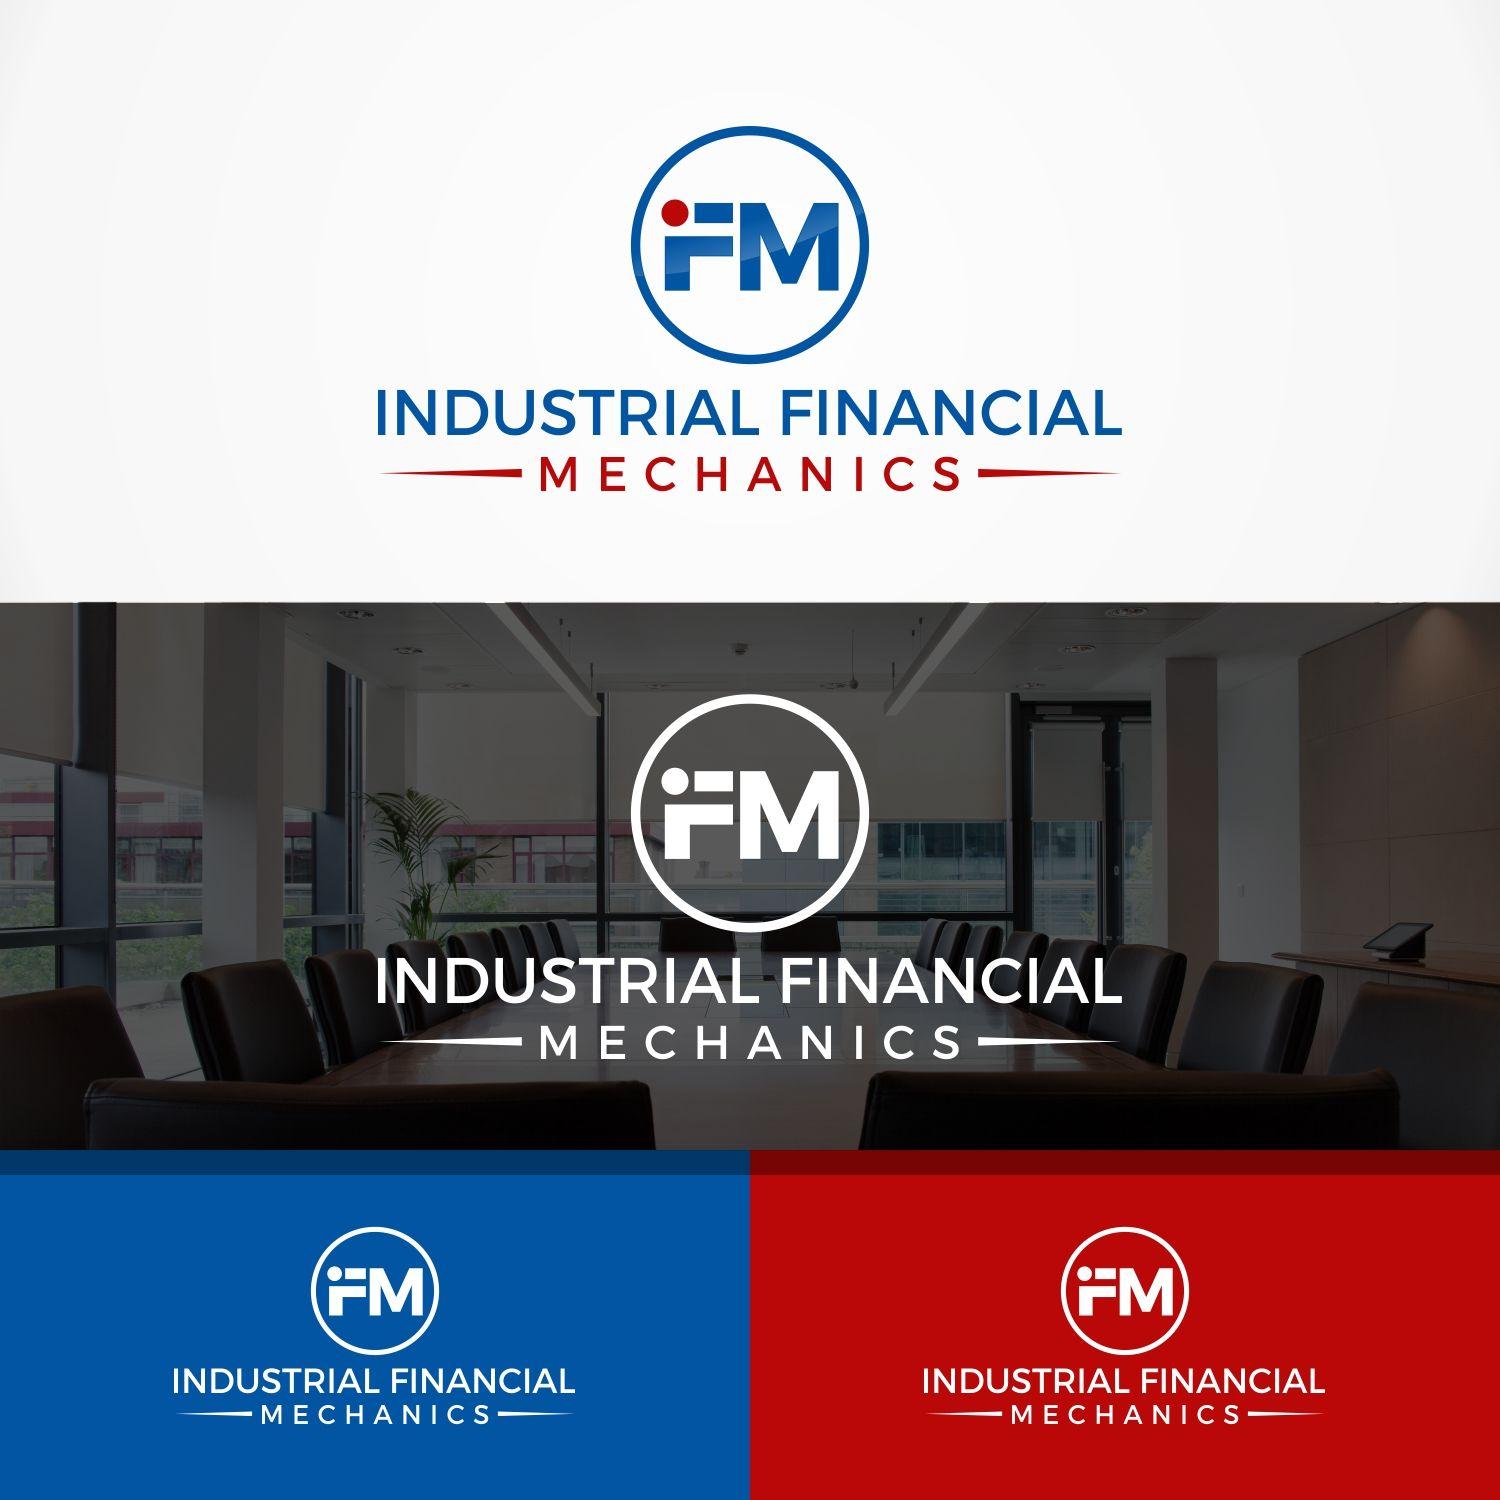 Industrial Mechanic Logo - Professional, Serious, Education Logo Design for IFM by Jessica ...